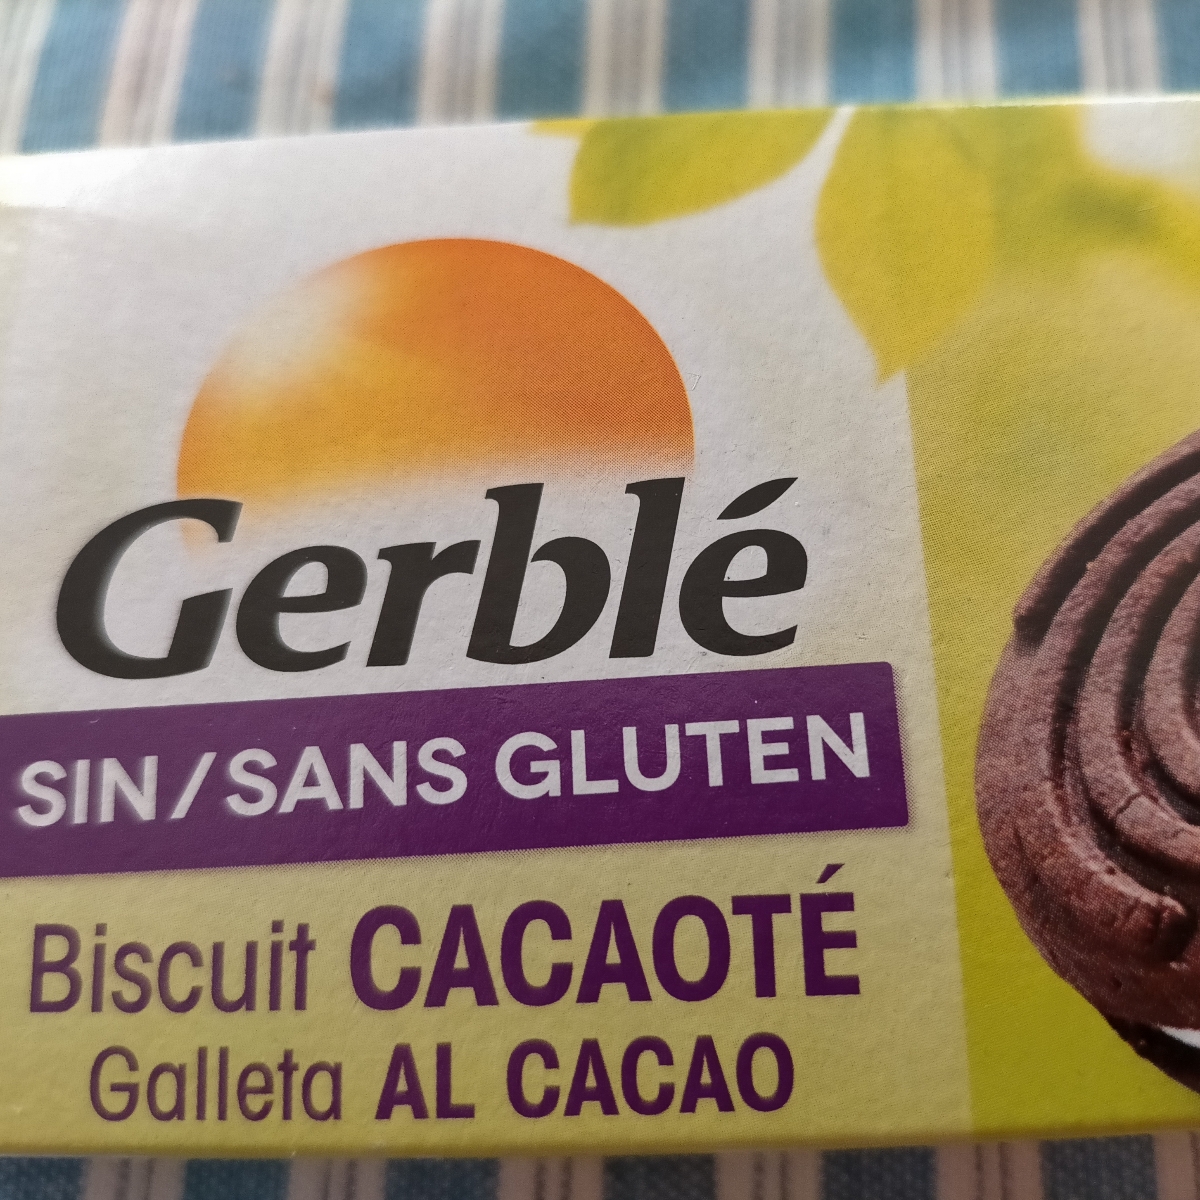 Biscuit cacaote sans gluten GERBLE